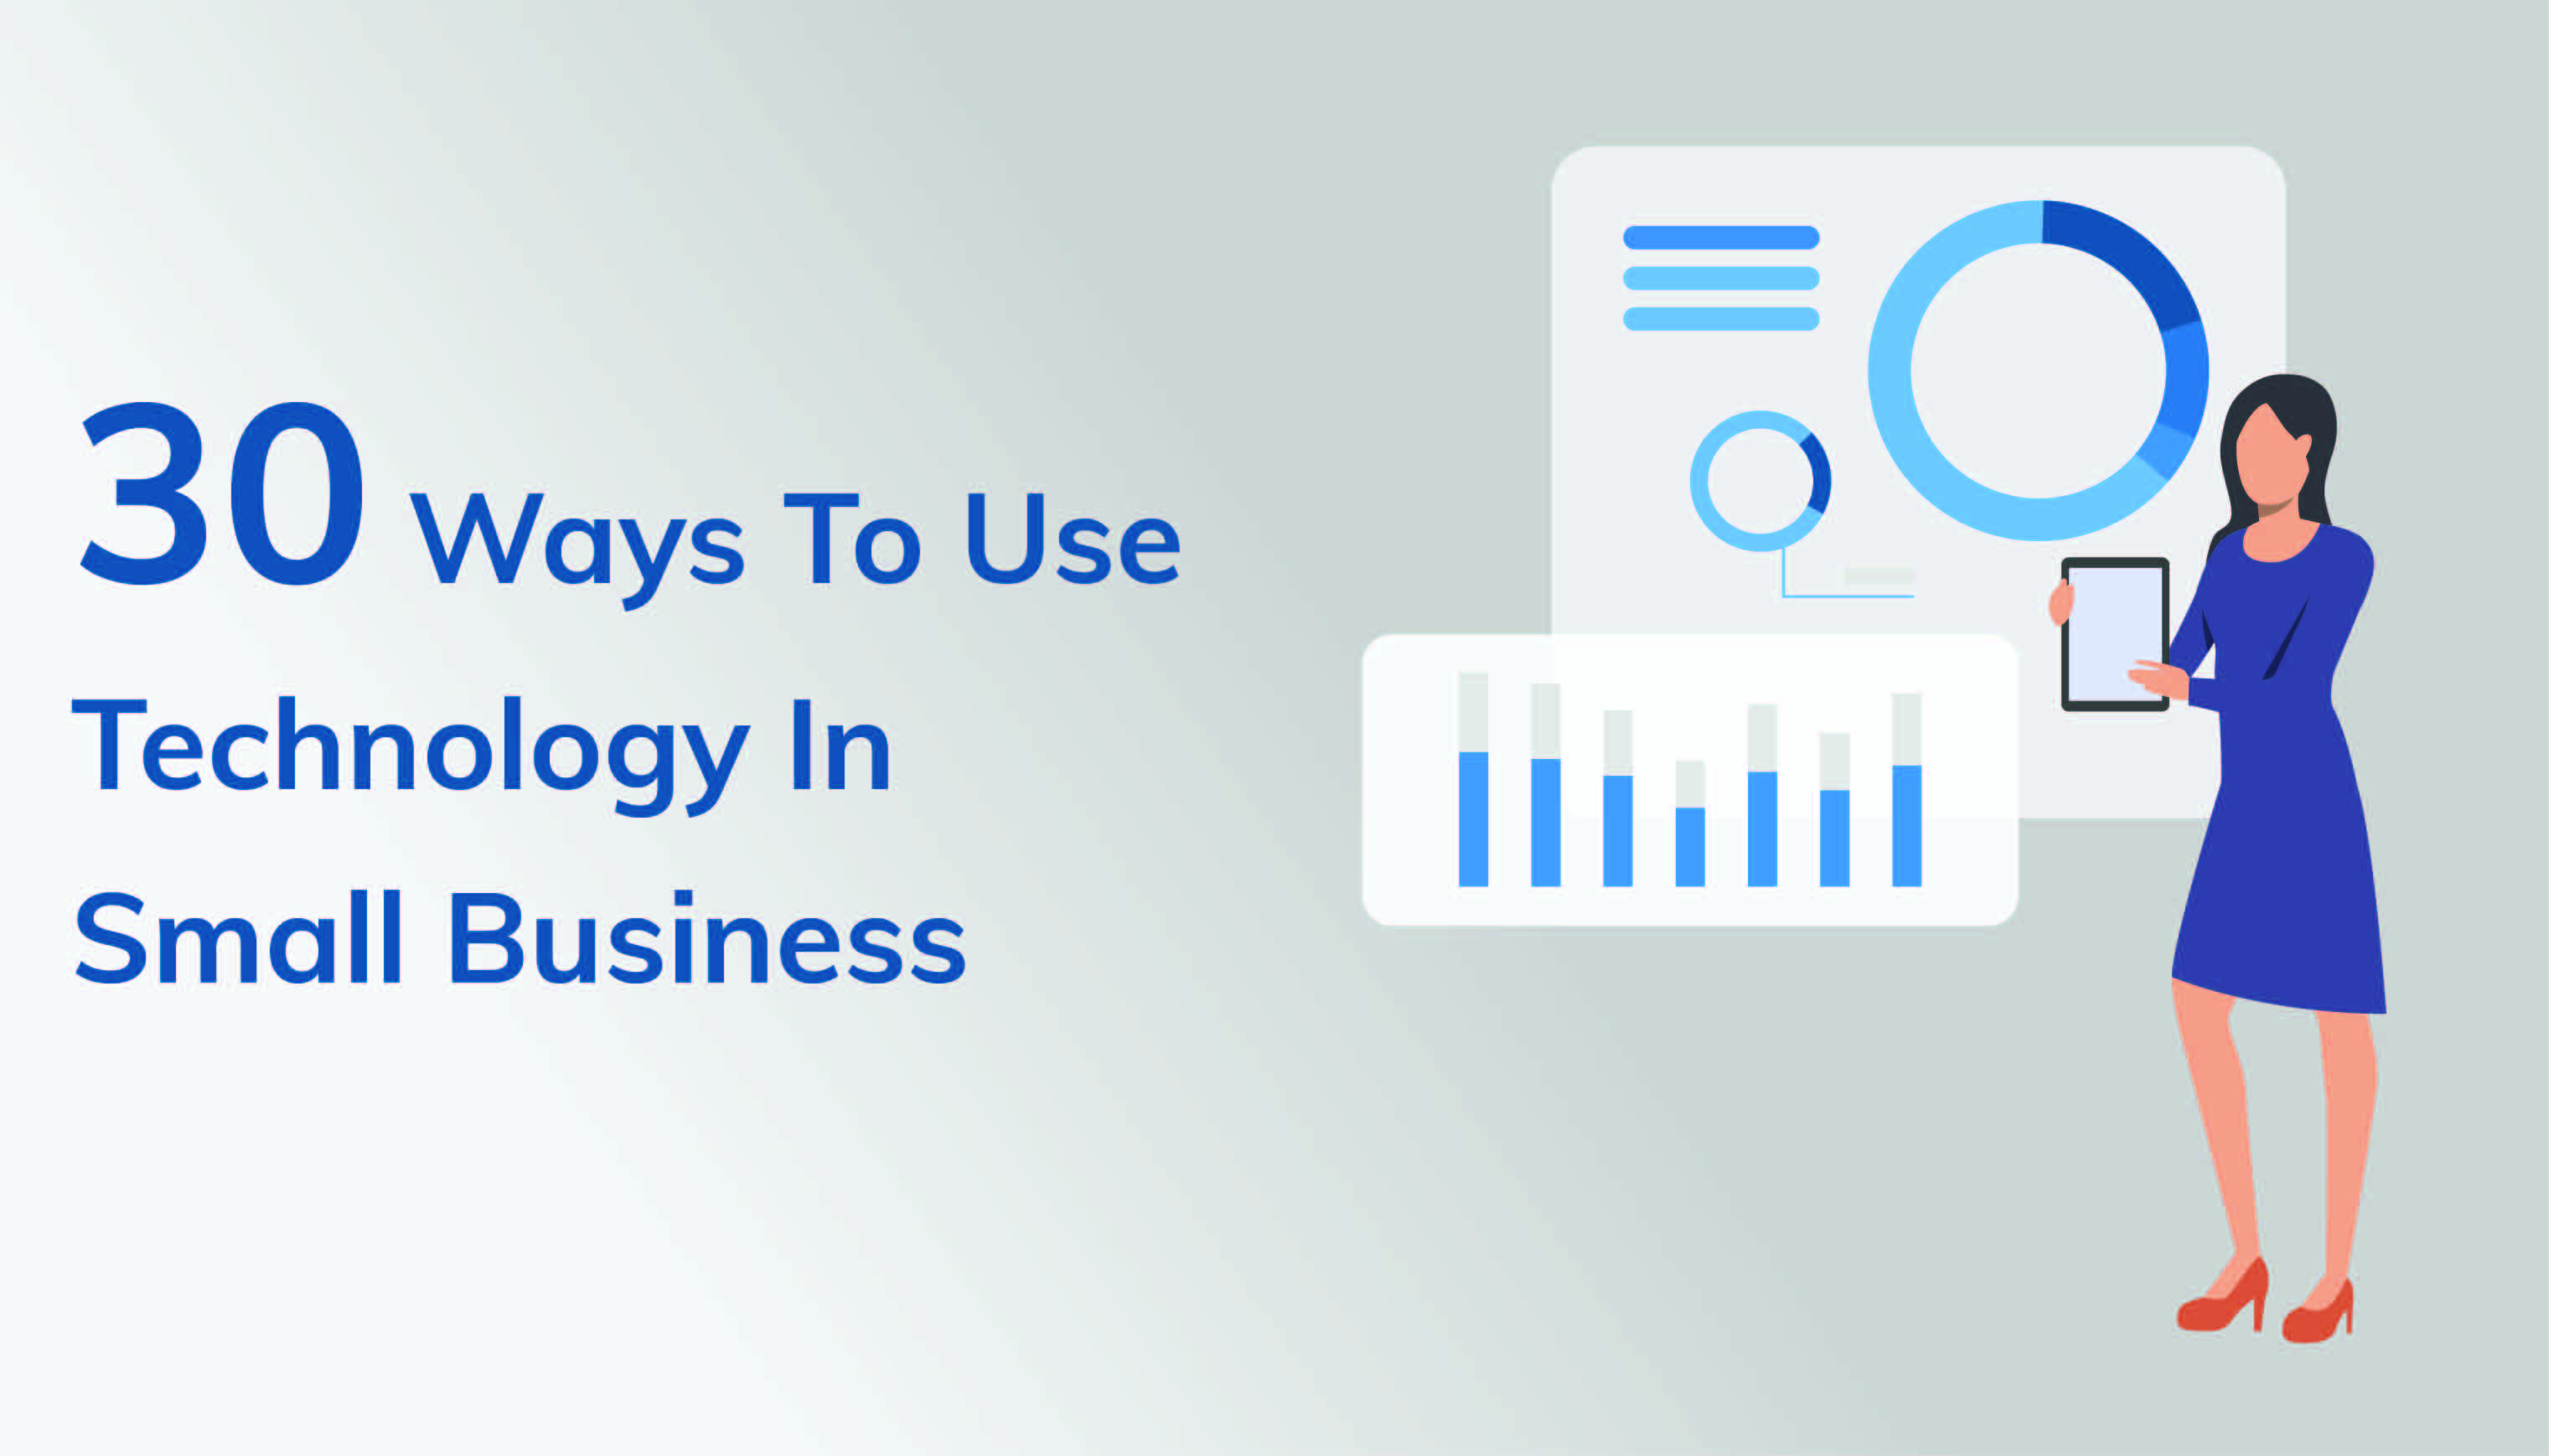 30 Ways To Use Technology In Your Small Business